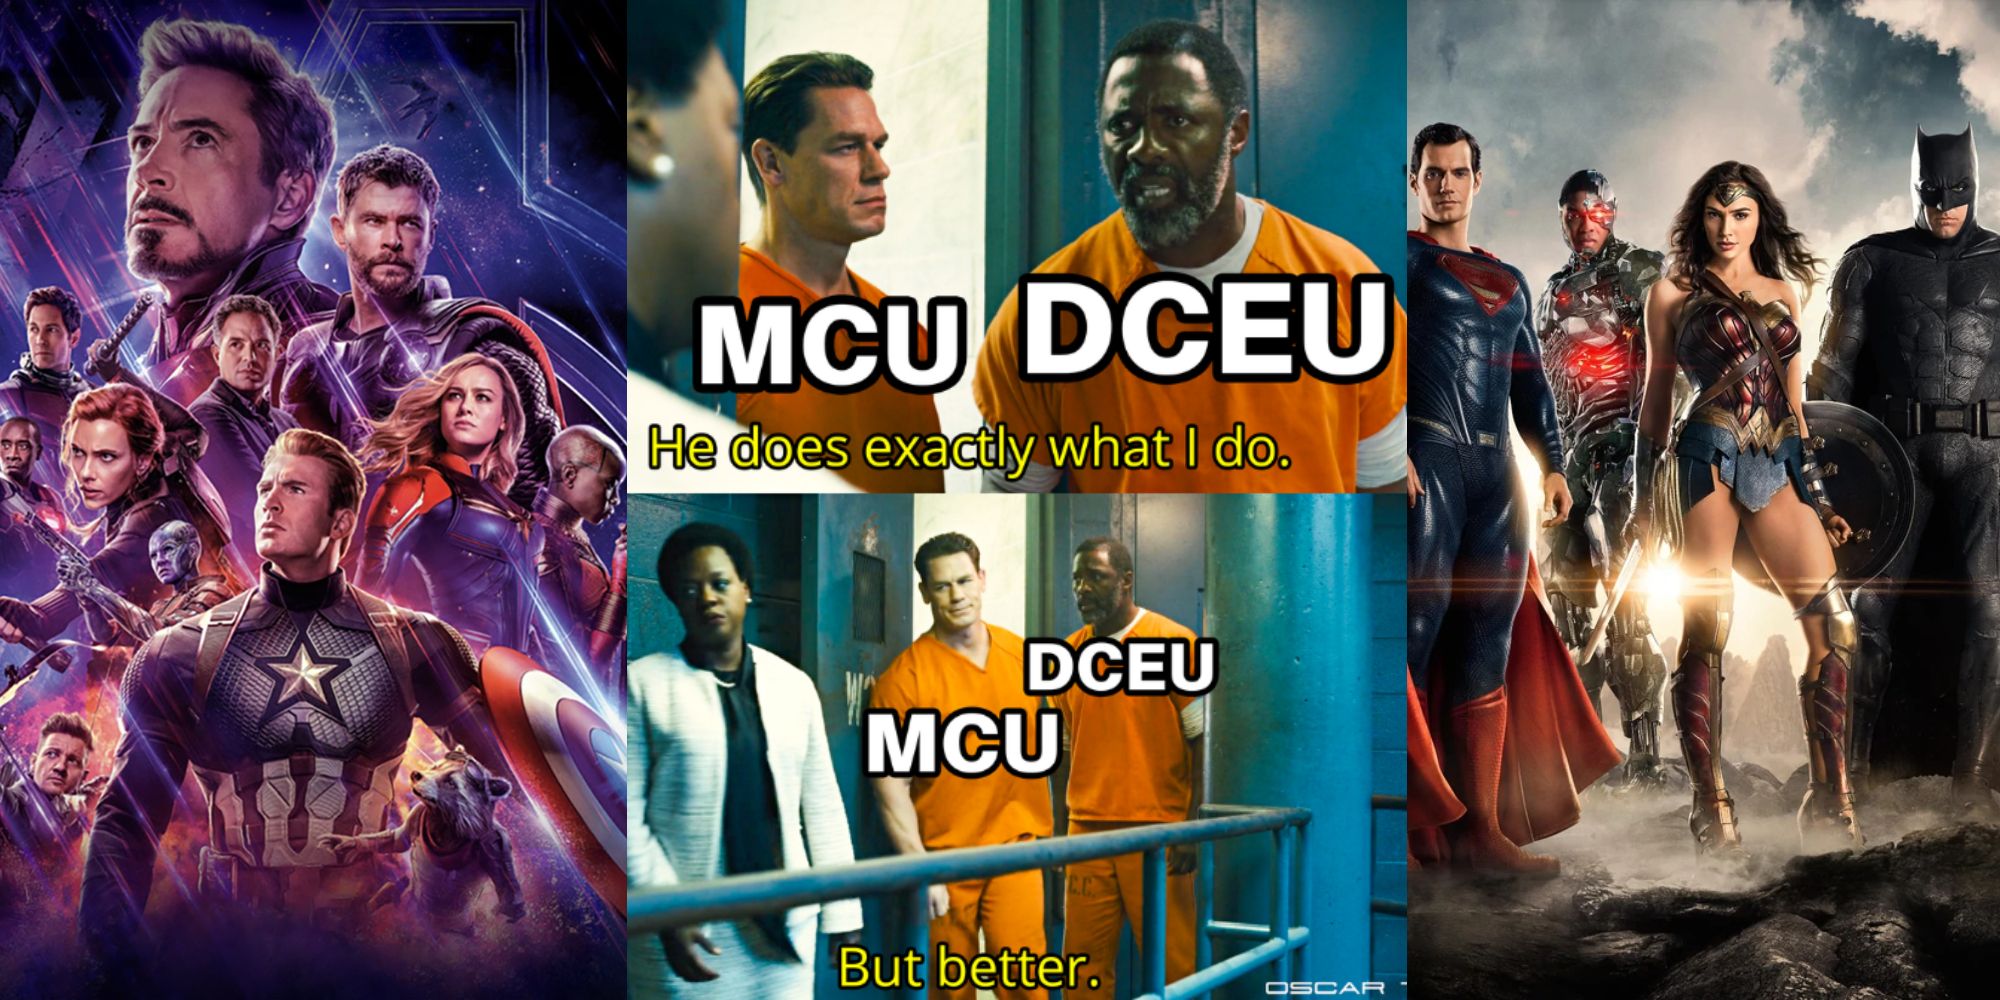 10 Memes That Perfectly Sum Up The MCU_DCEU Rivalry